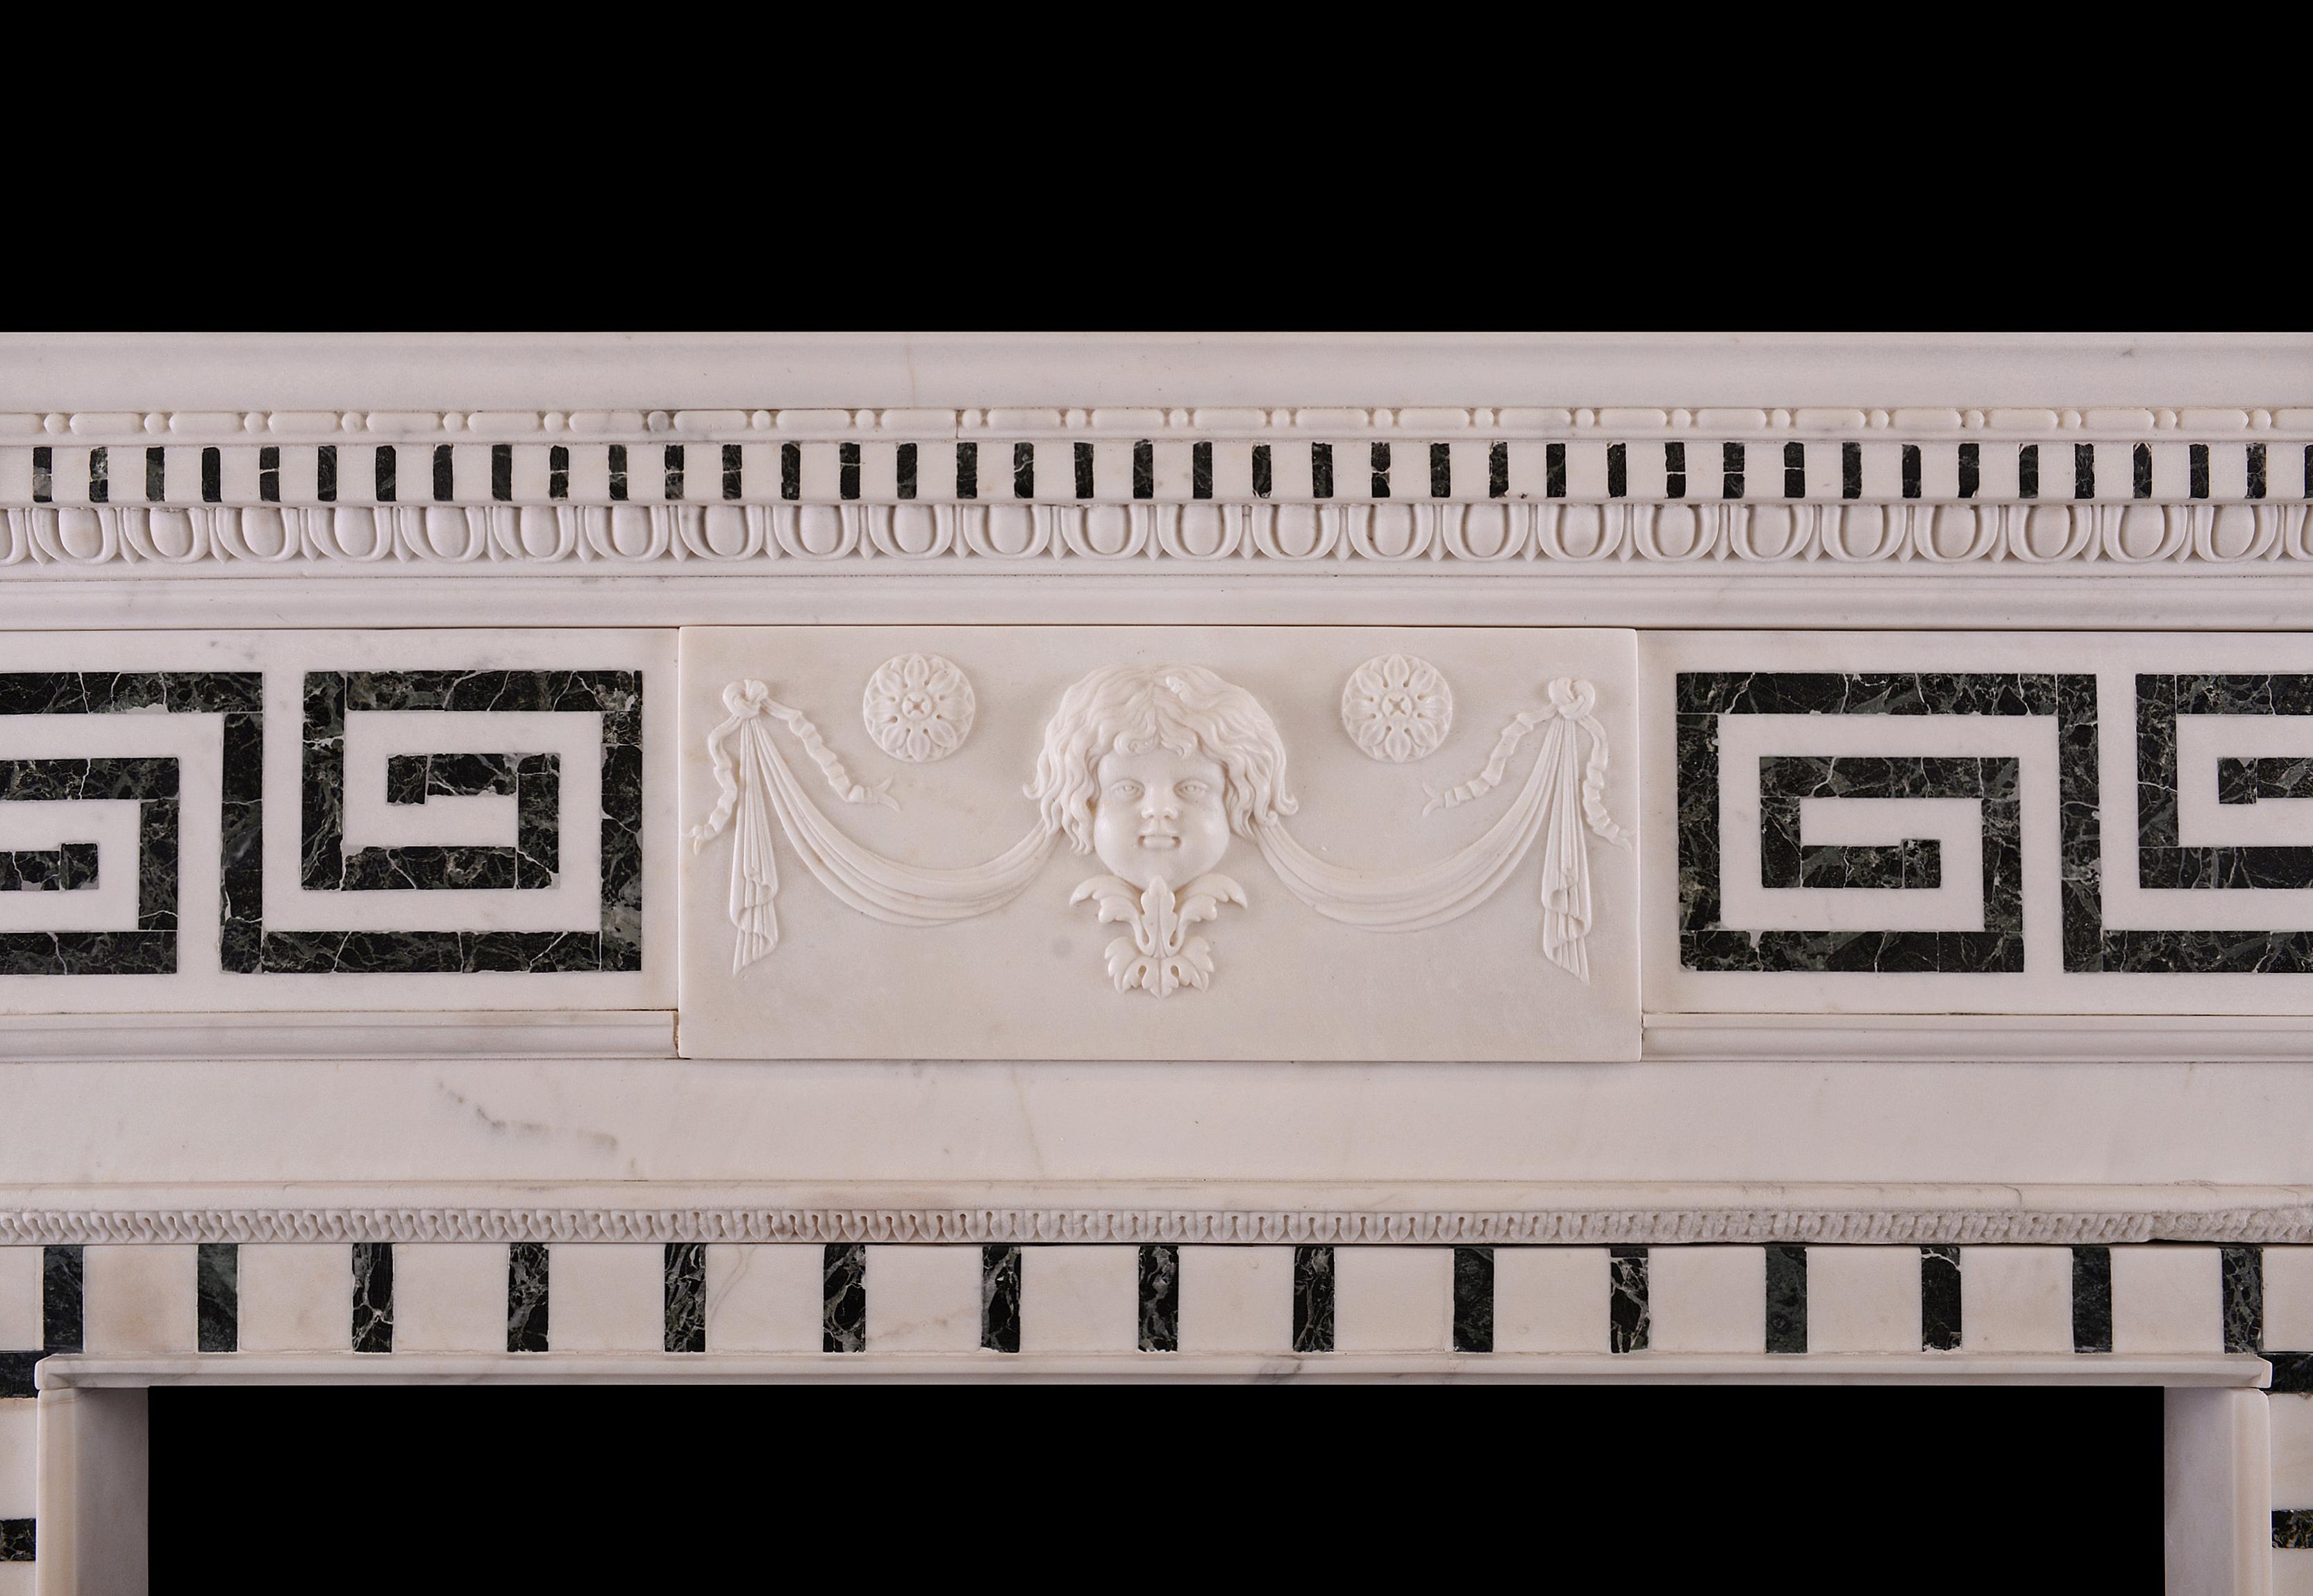 A 19th century English statuary and inlaid Tinos marble fireplace, with carved mask and drapery centre tablet, inlaid Greek key side panels, fluted Tinos marble jambs with oval patera surmounted by urn side blockings, and inlaid dentil cornice and